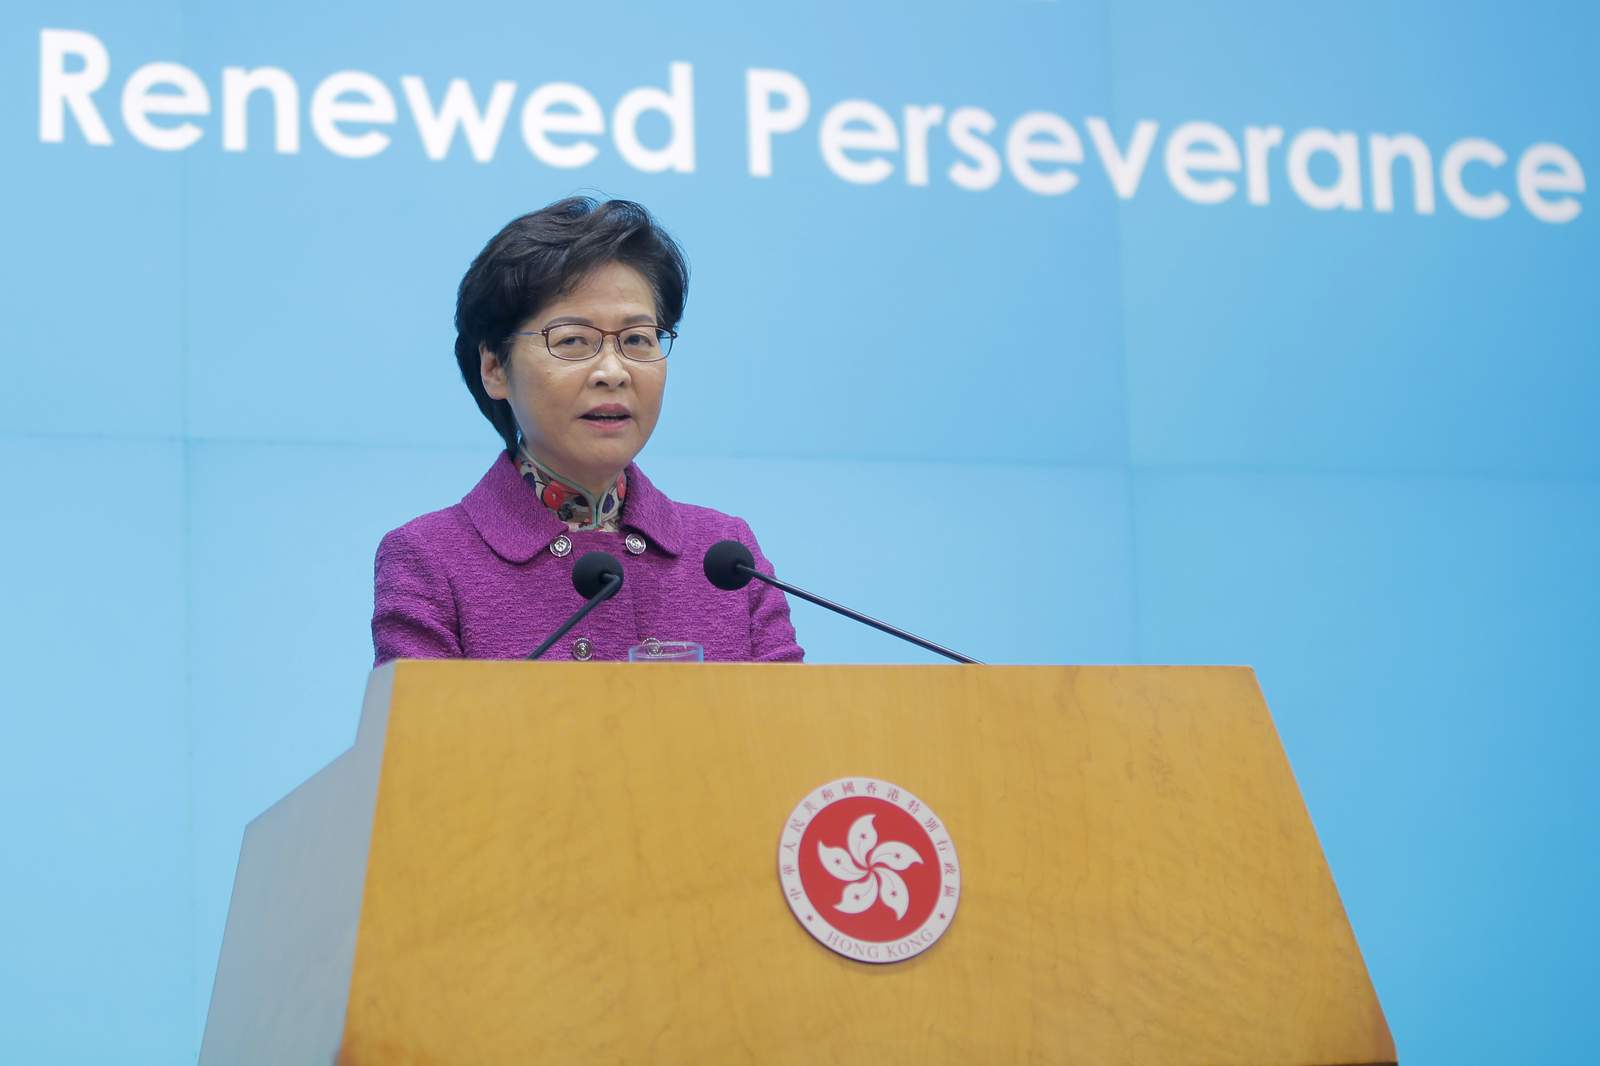 Hong Kong leader lauds new security law despite criticism